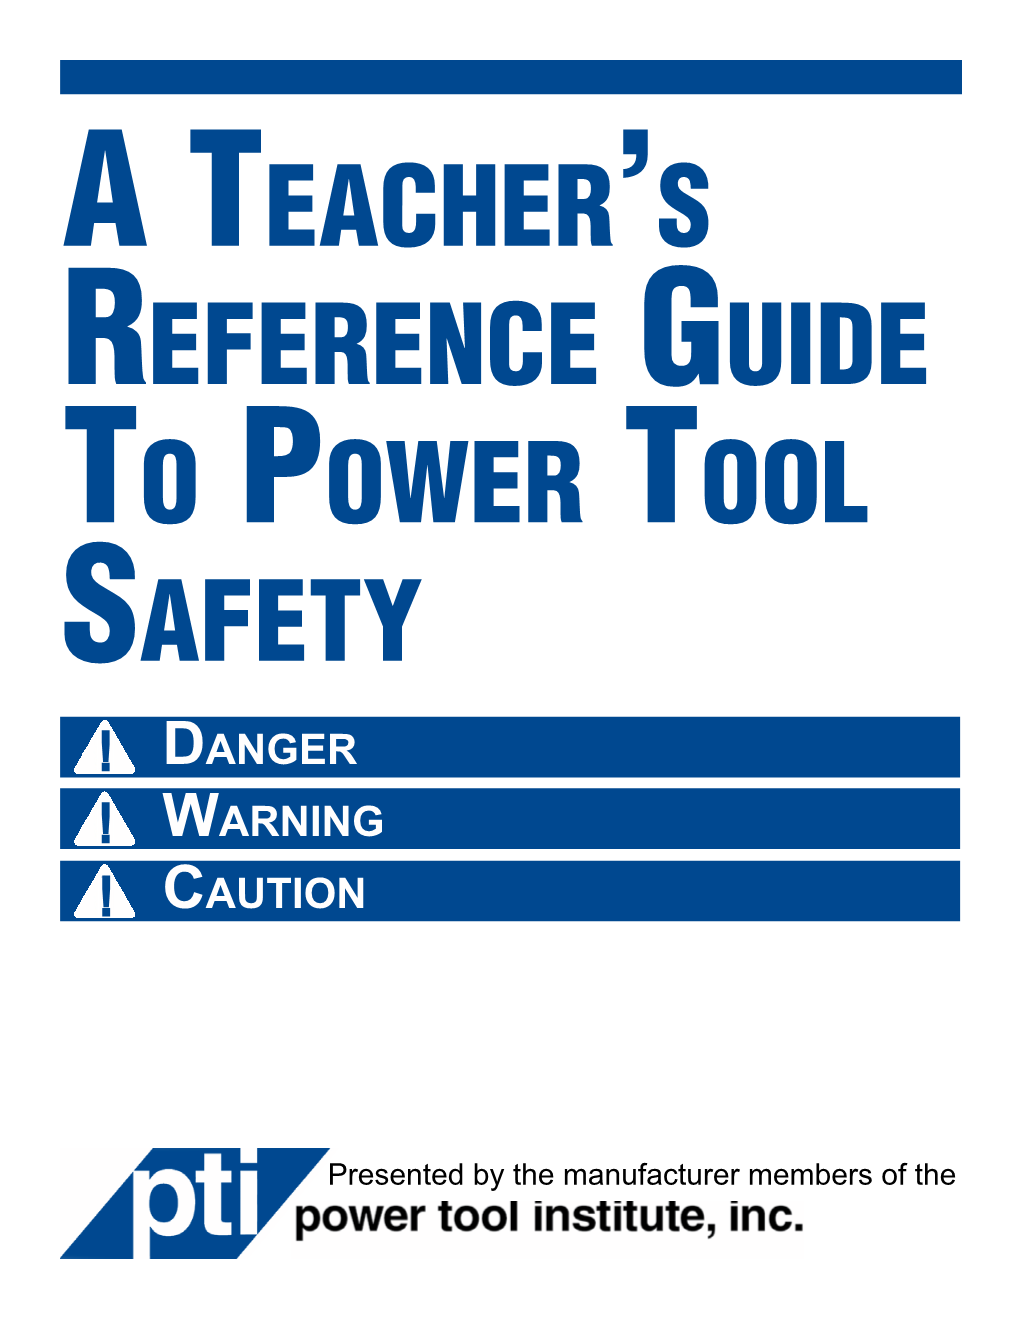 A Teacher's Reference Guide to Power Tool Safety